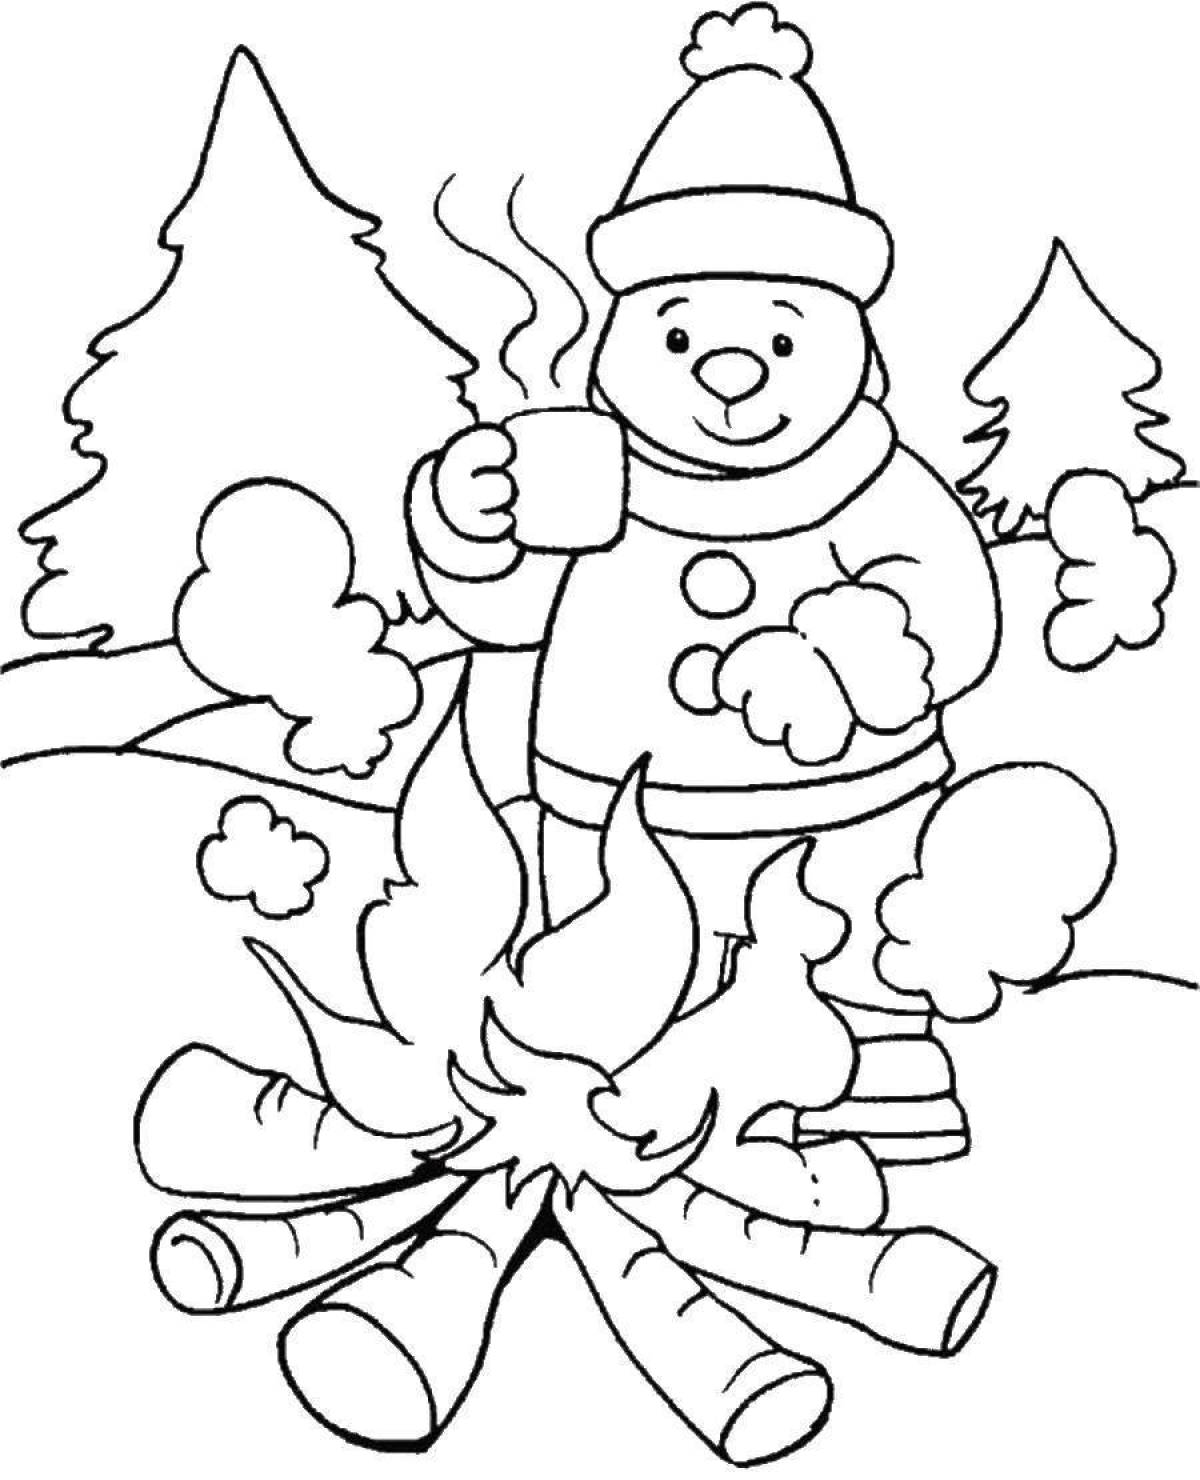 Fun coloring book winter for children 5-6 years old